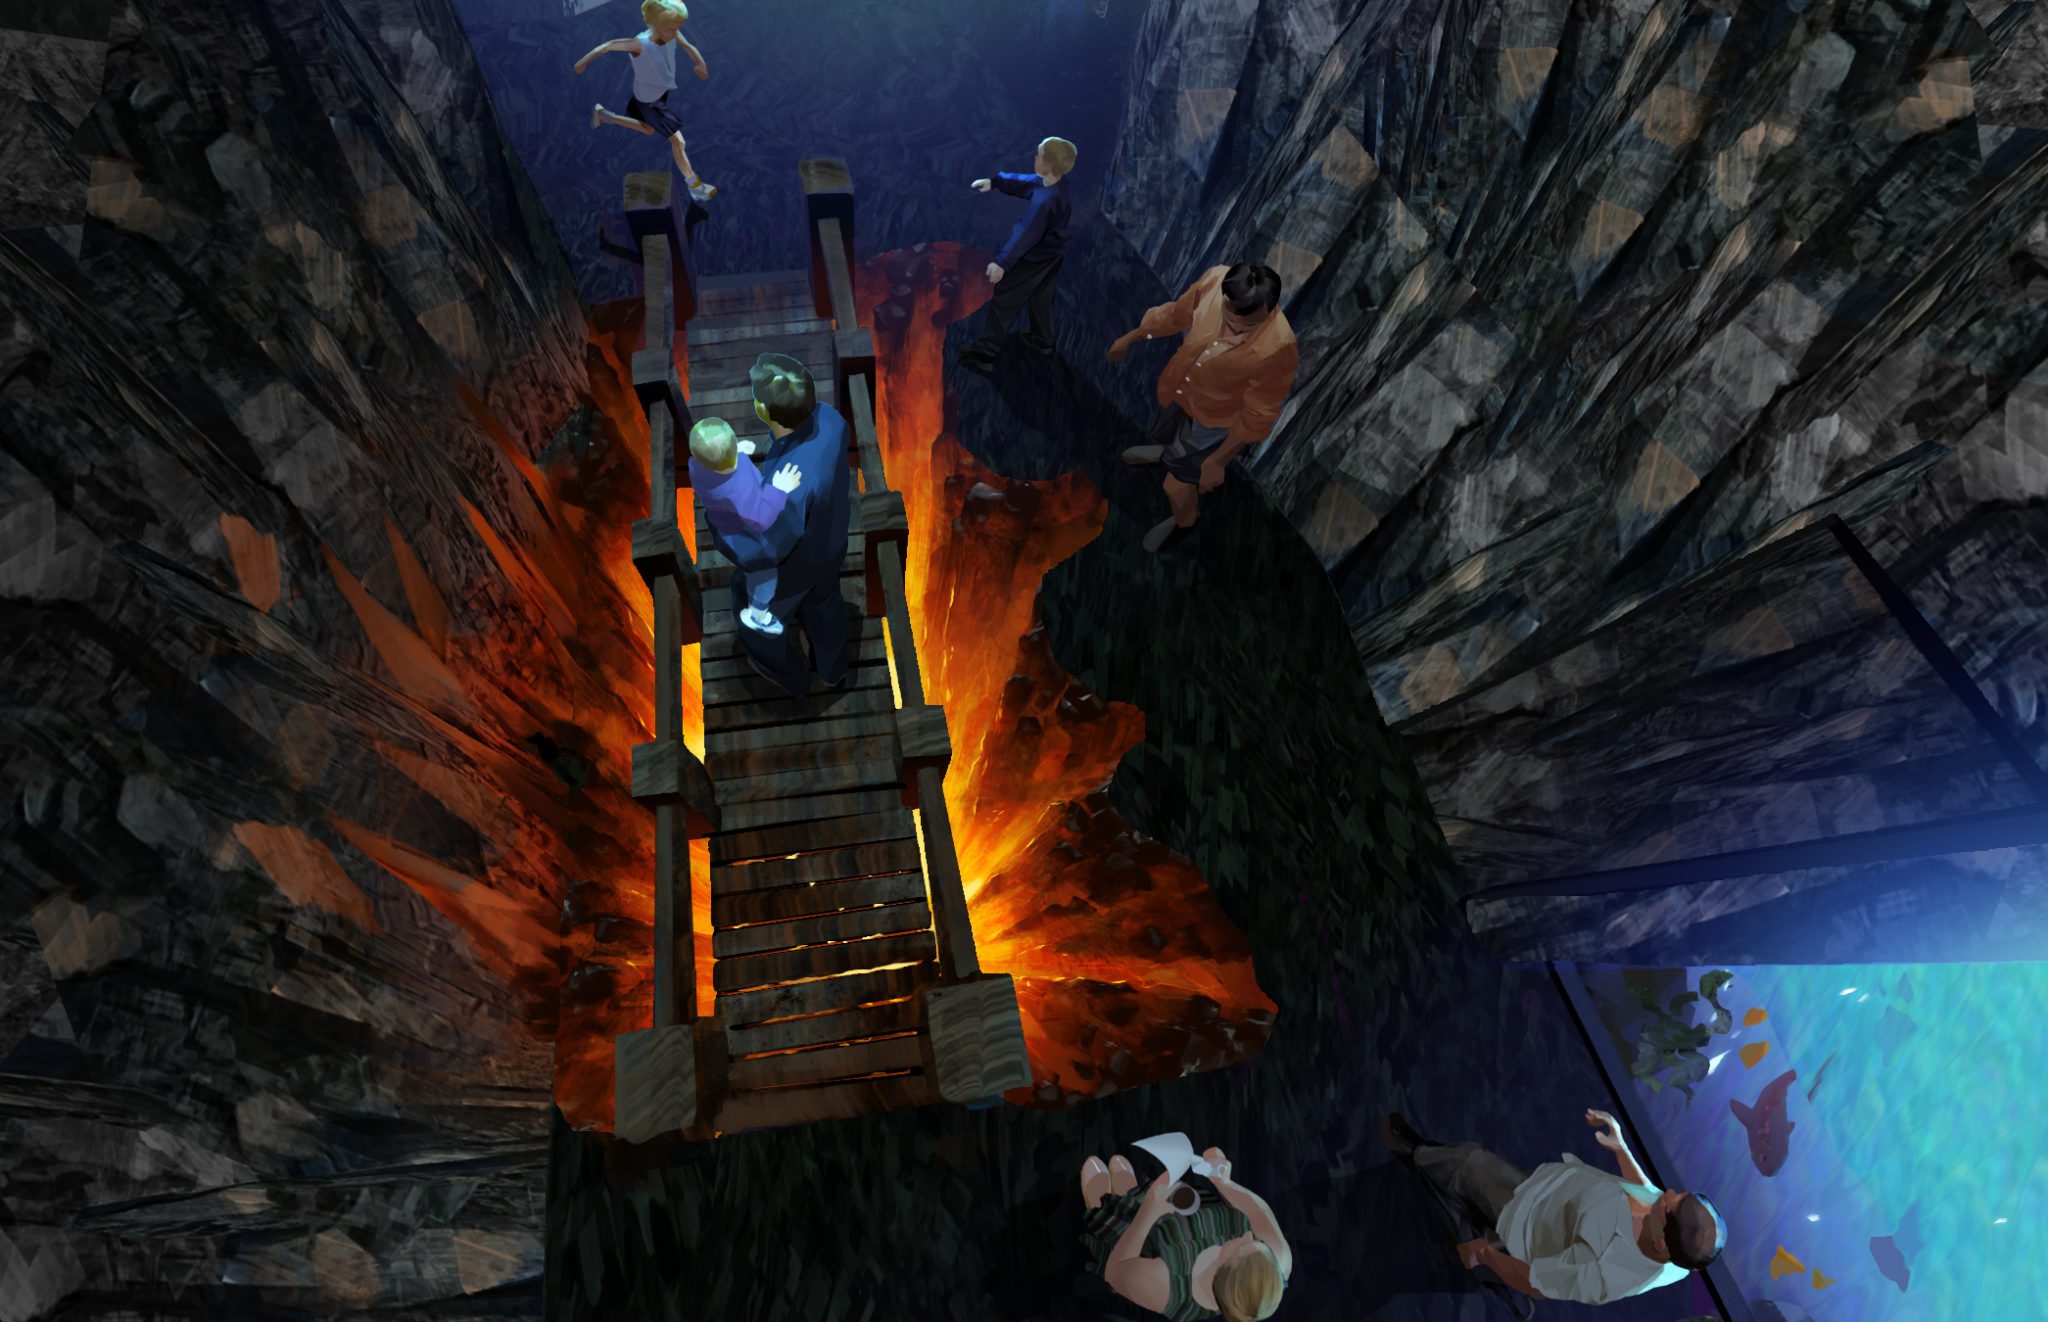 A concept image of people walking over a bridge with lava underneath